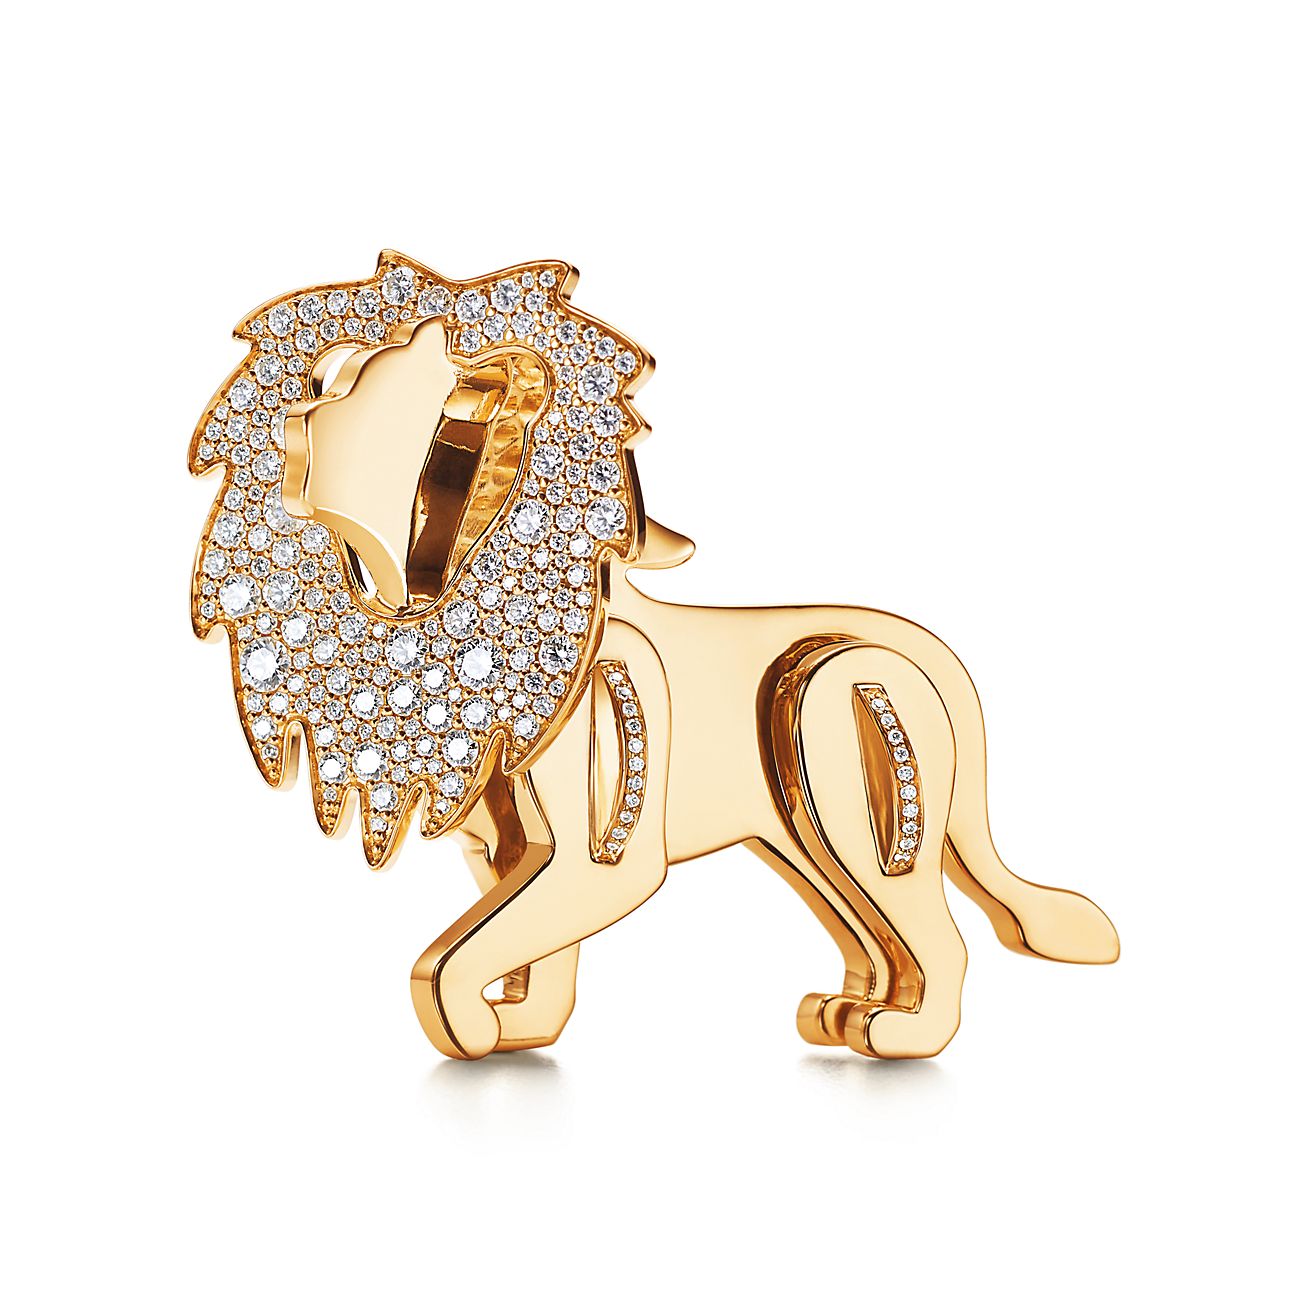 Tiffany Save the Wild lion brooch in 